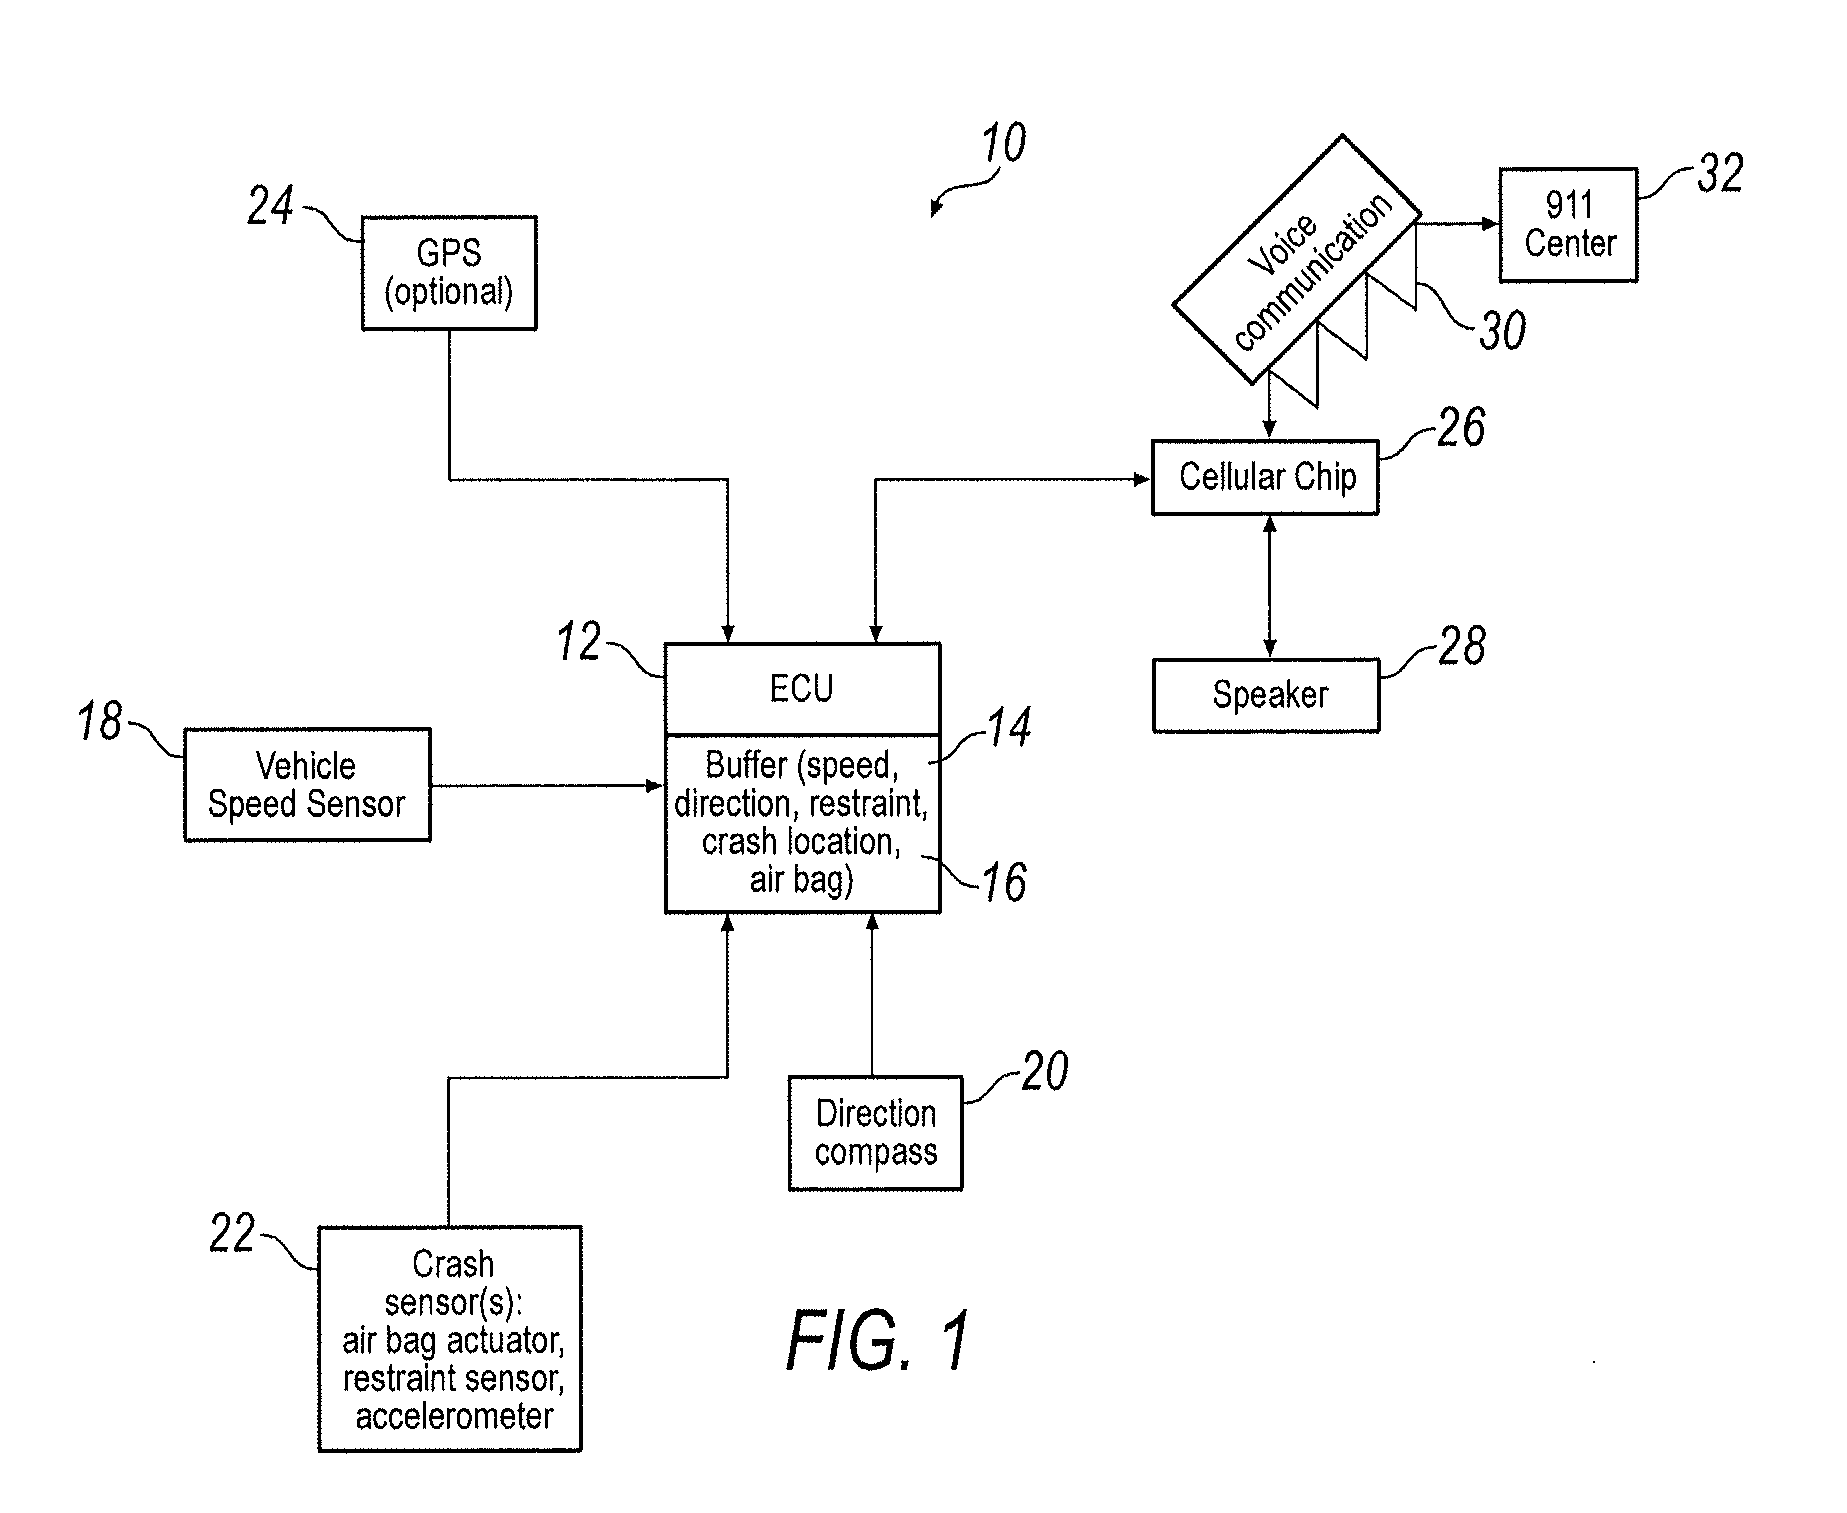 Low cost, automatic collision notification system and method of using the same